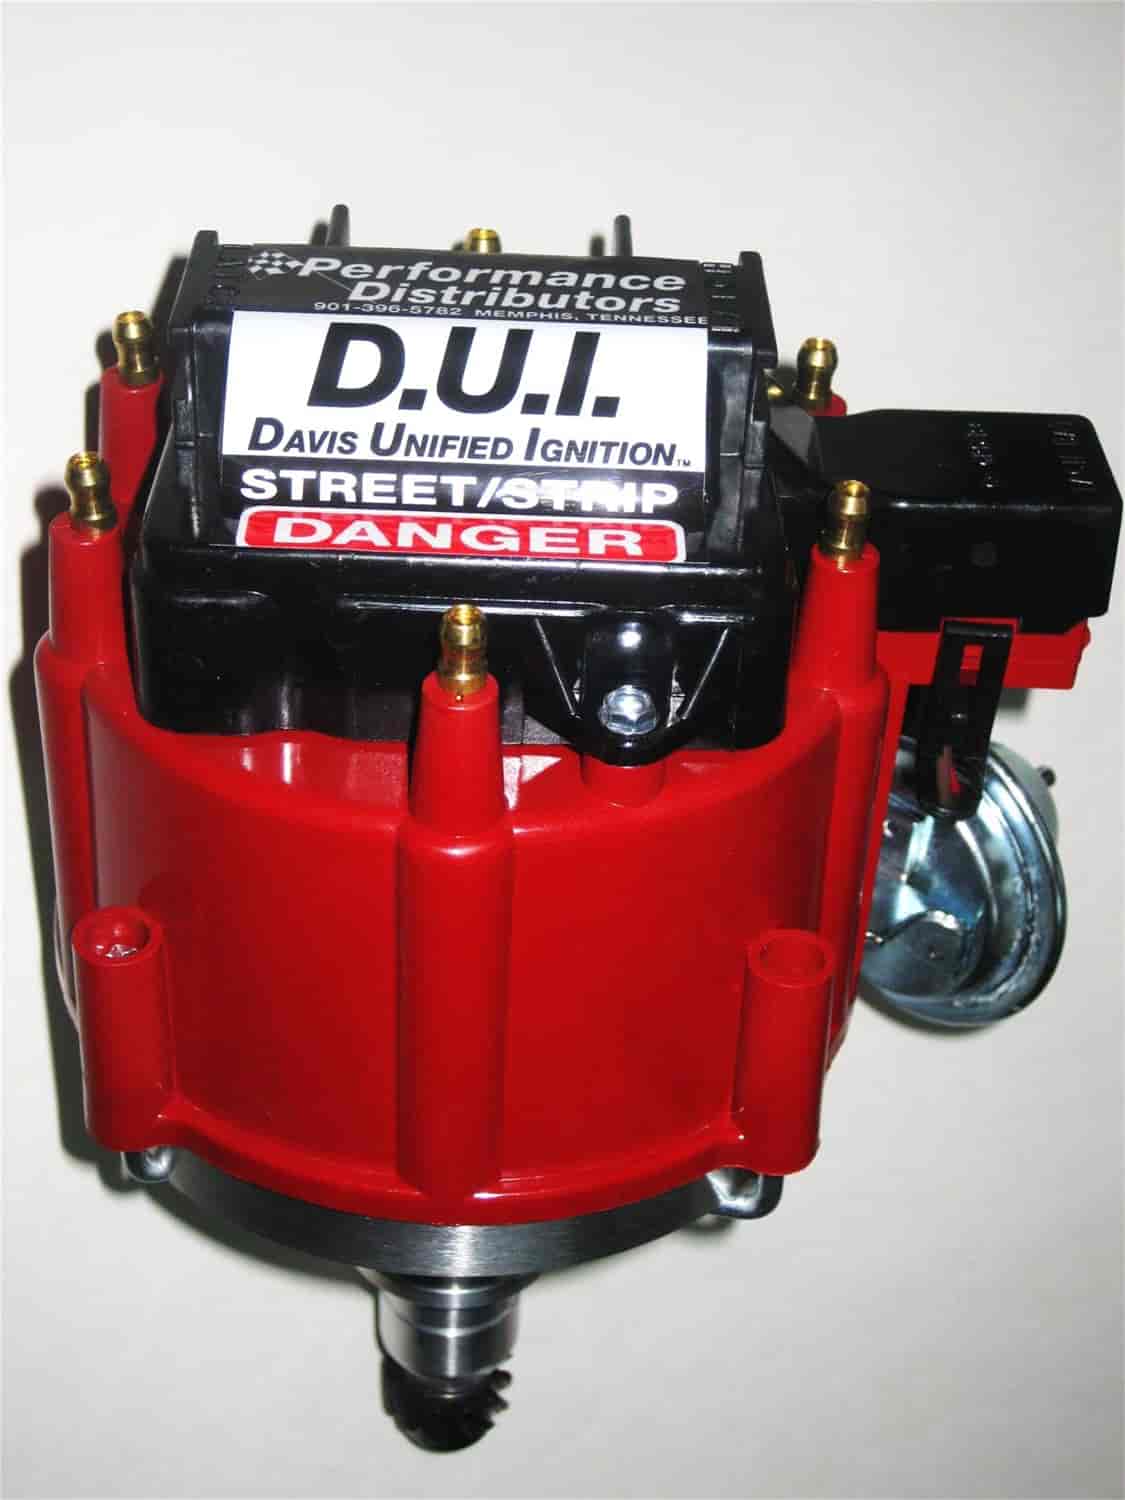 DUI Distributor VG30 &VG33 Carbureted Nissan 6 Cyl. Engines-NON-computer applications only